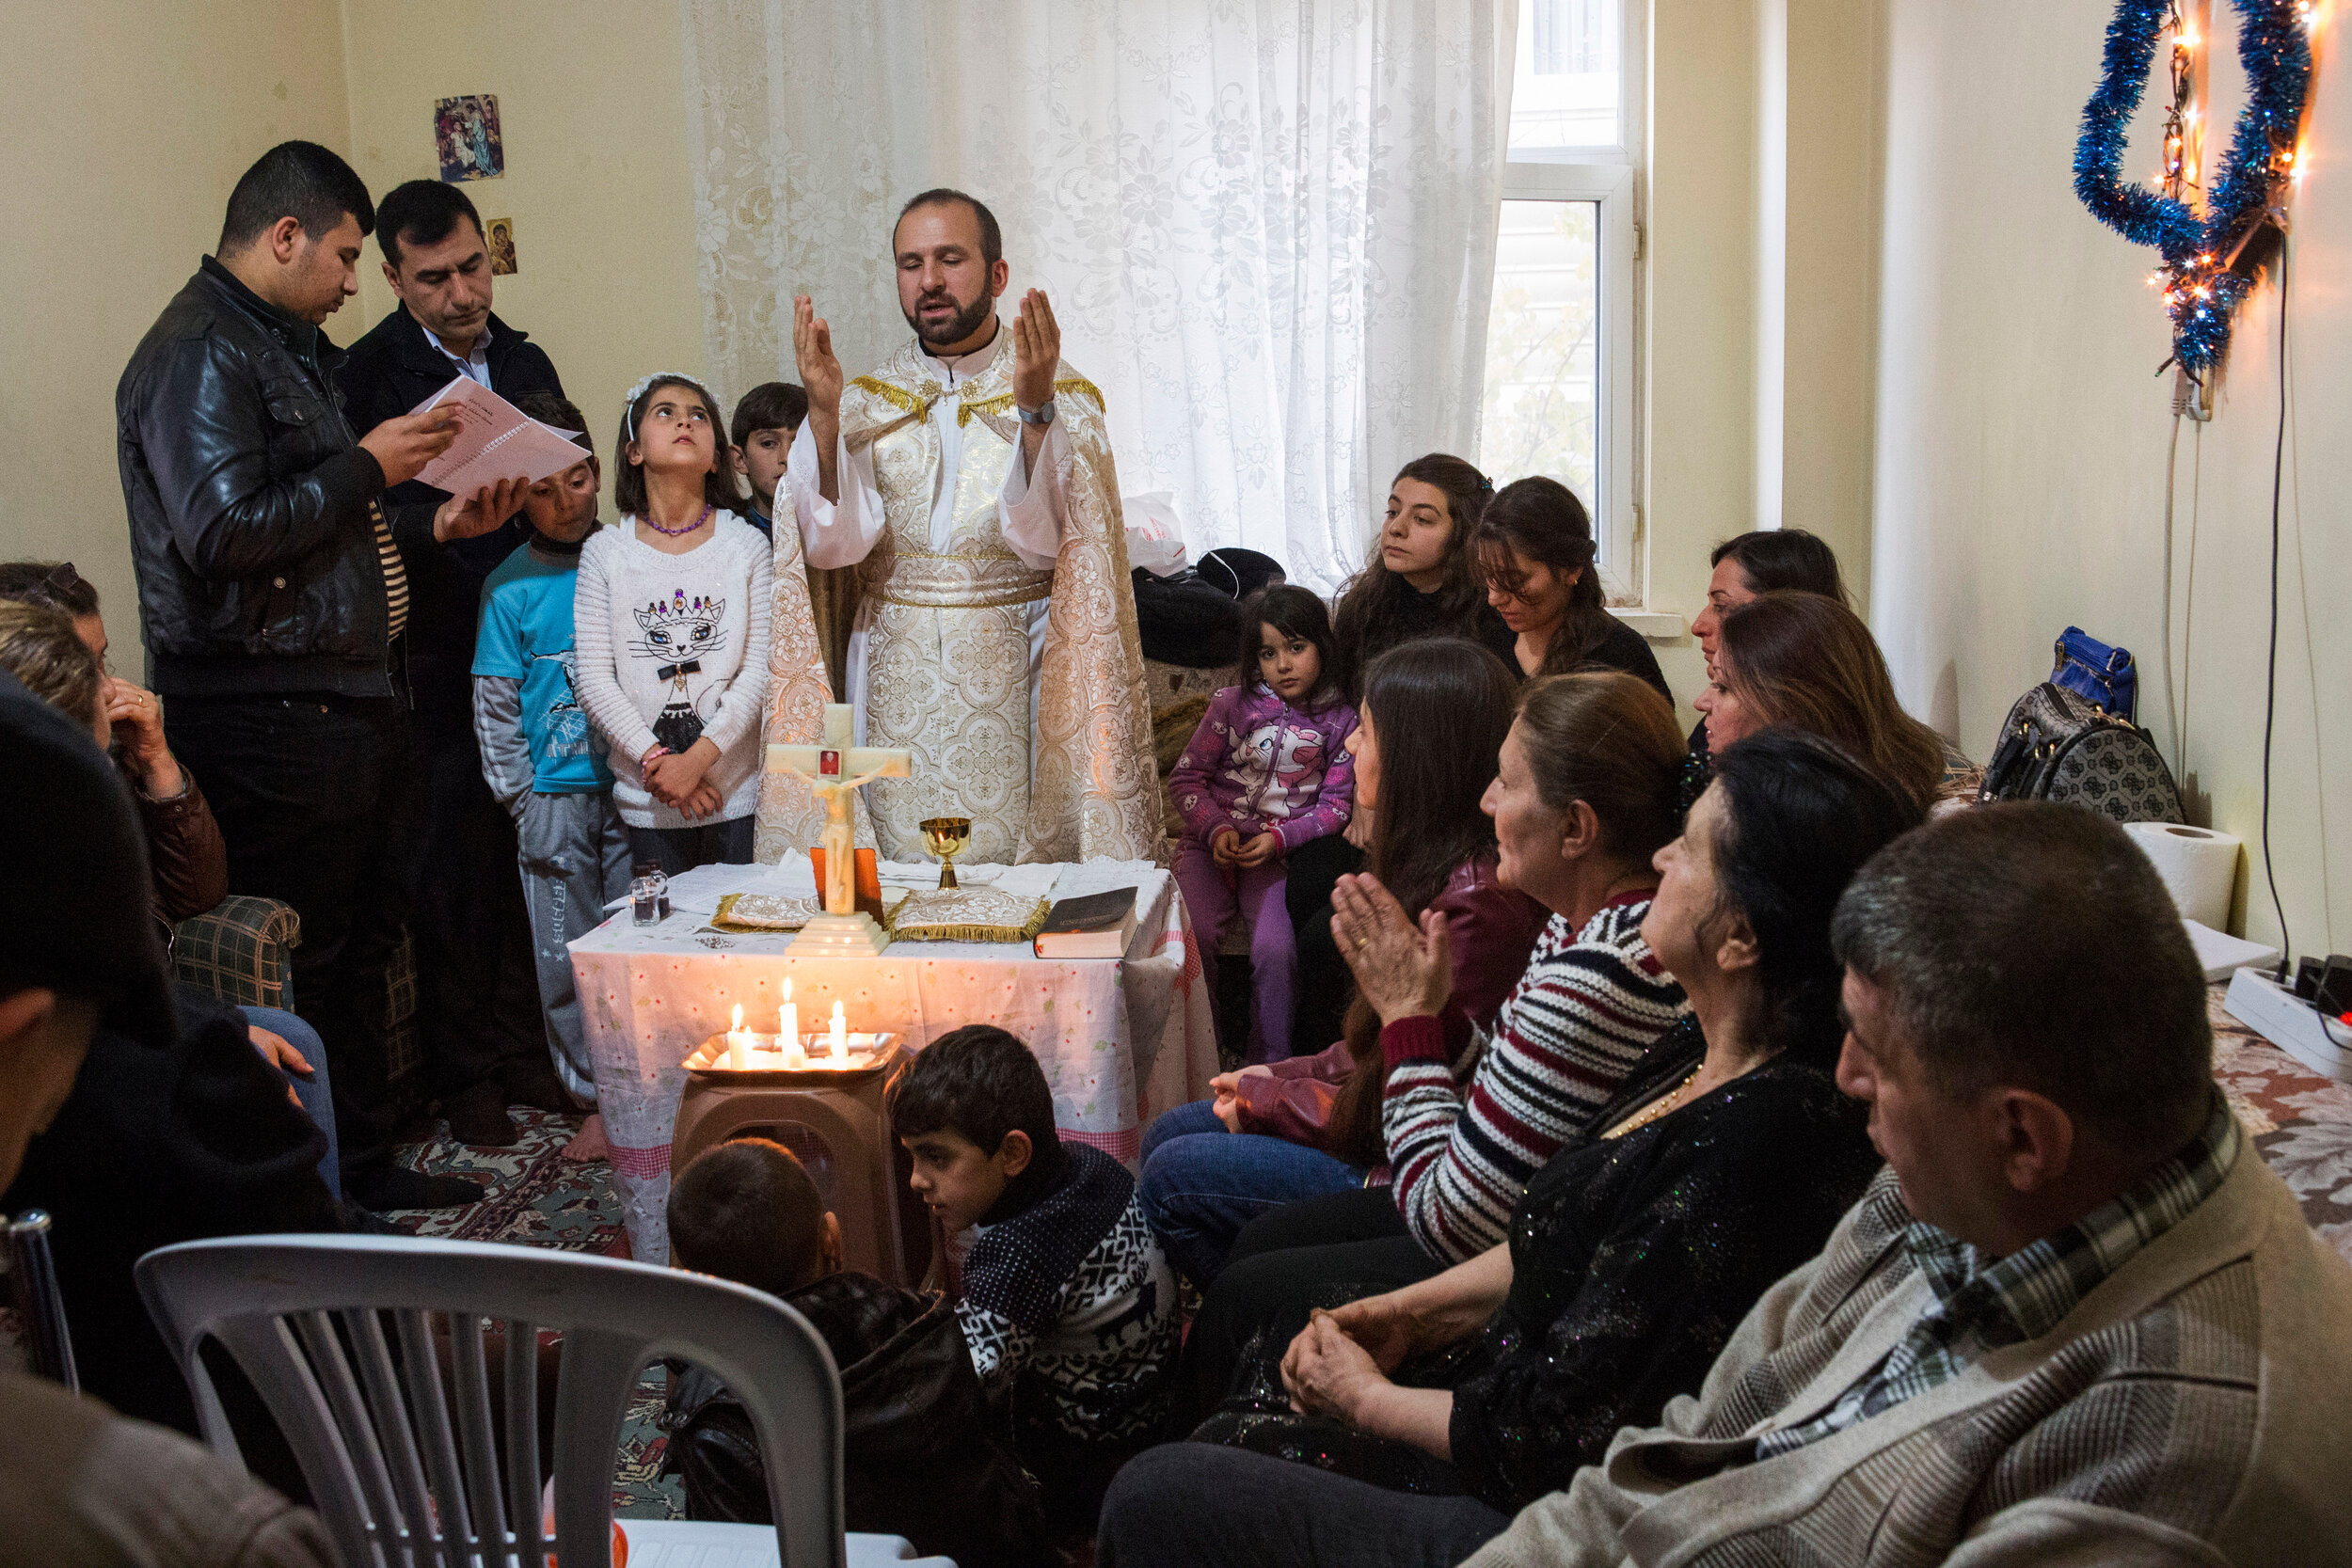  Father Remzi Diril, known as Father Adday, celebrates mass at an home in Kirsehir, Turkey. Father Adday is the only Chaldean Catholic priest in charge of pastoral work in Turkey. Every year he travels across Turkey to tend to the community of Iraqi 